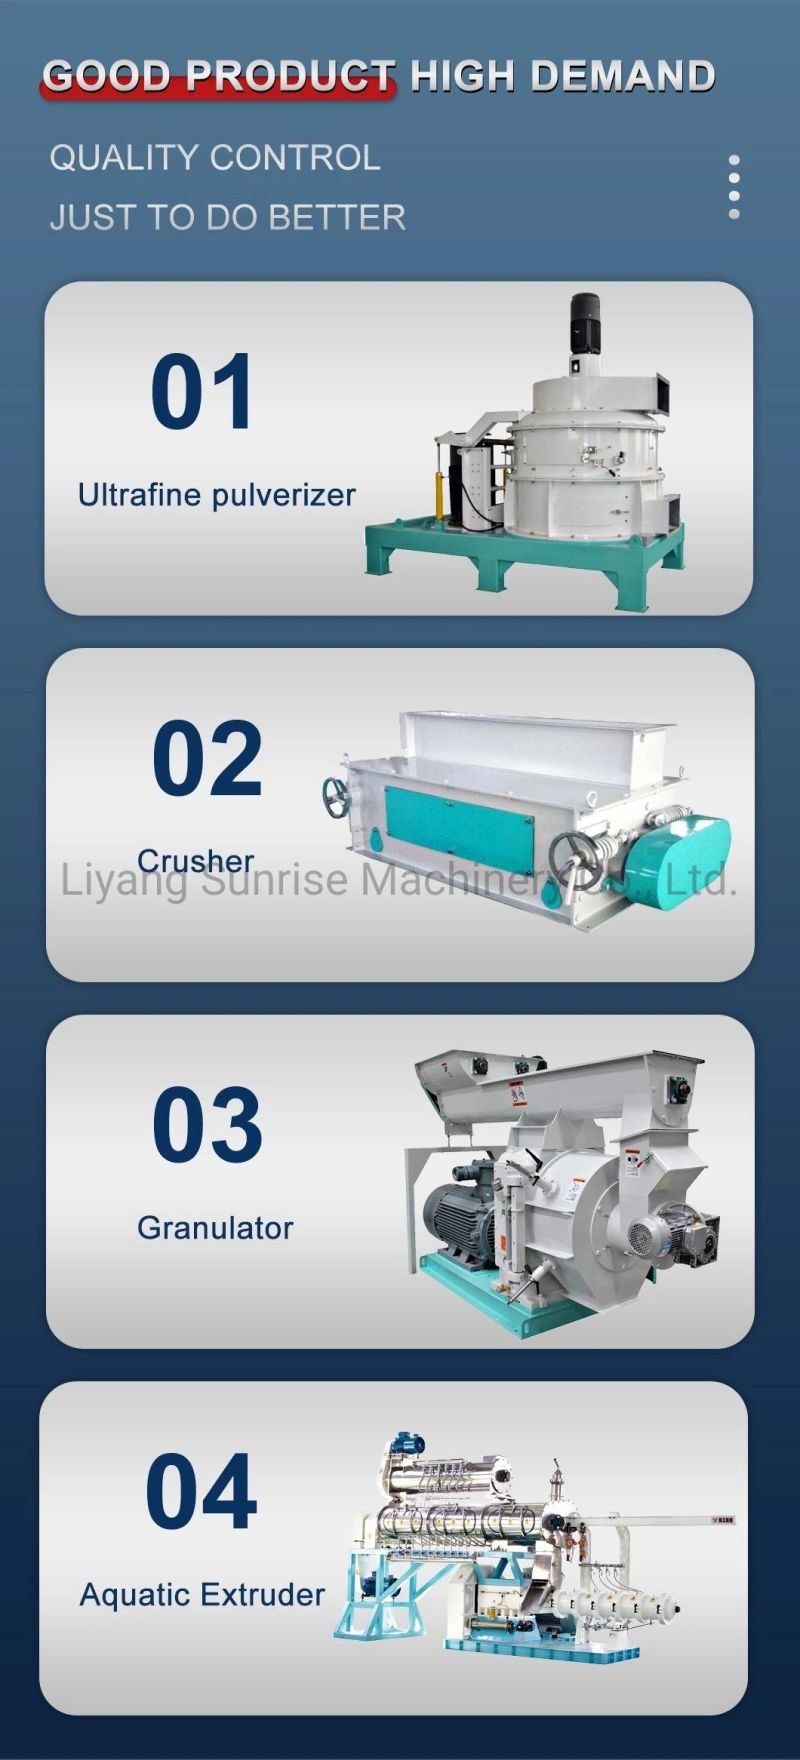 Hi-Efficient Cleaning and Screening Machine for Poultry Feed Drum Type Cleaning Machine